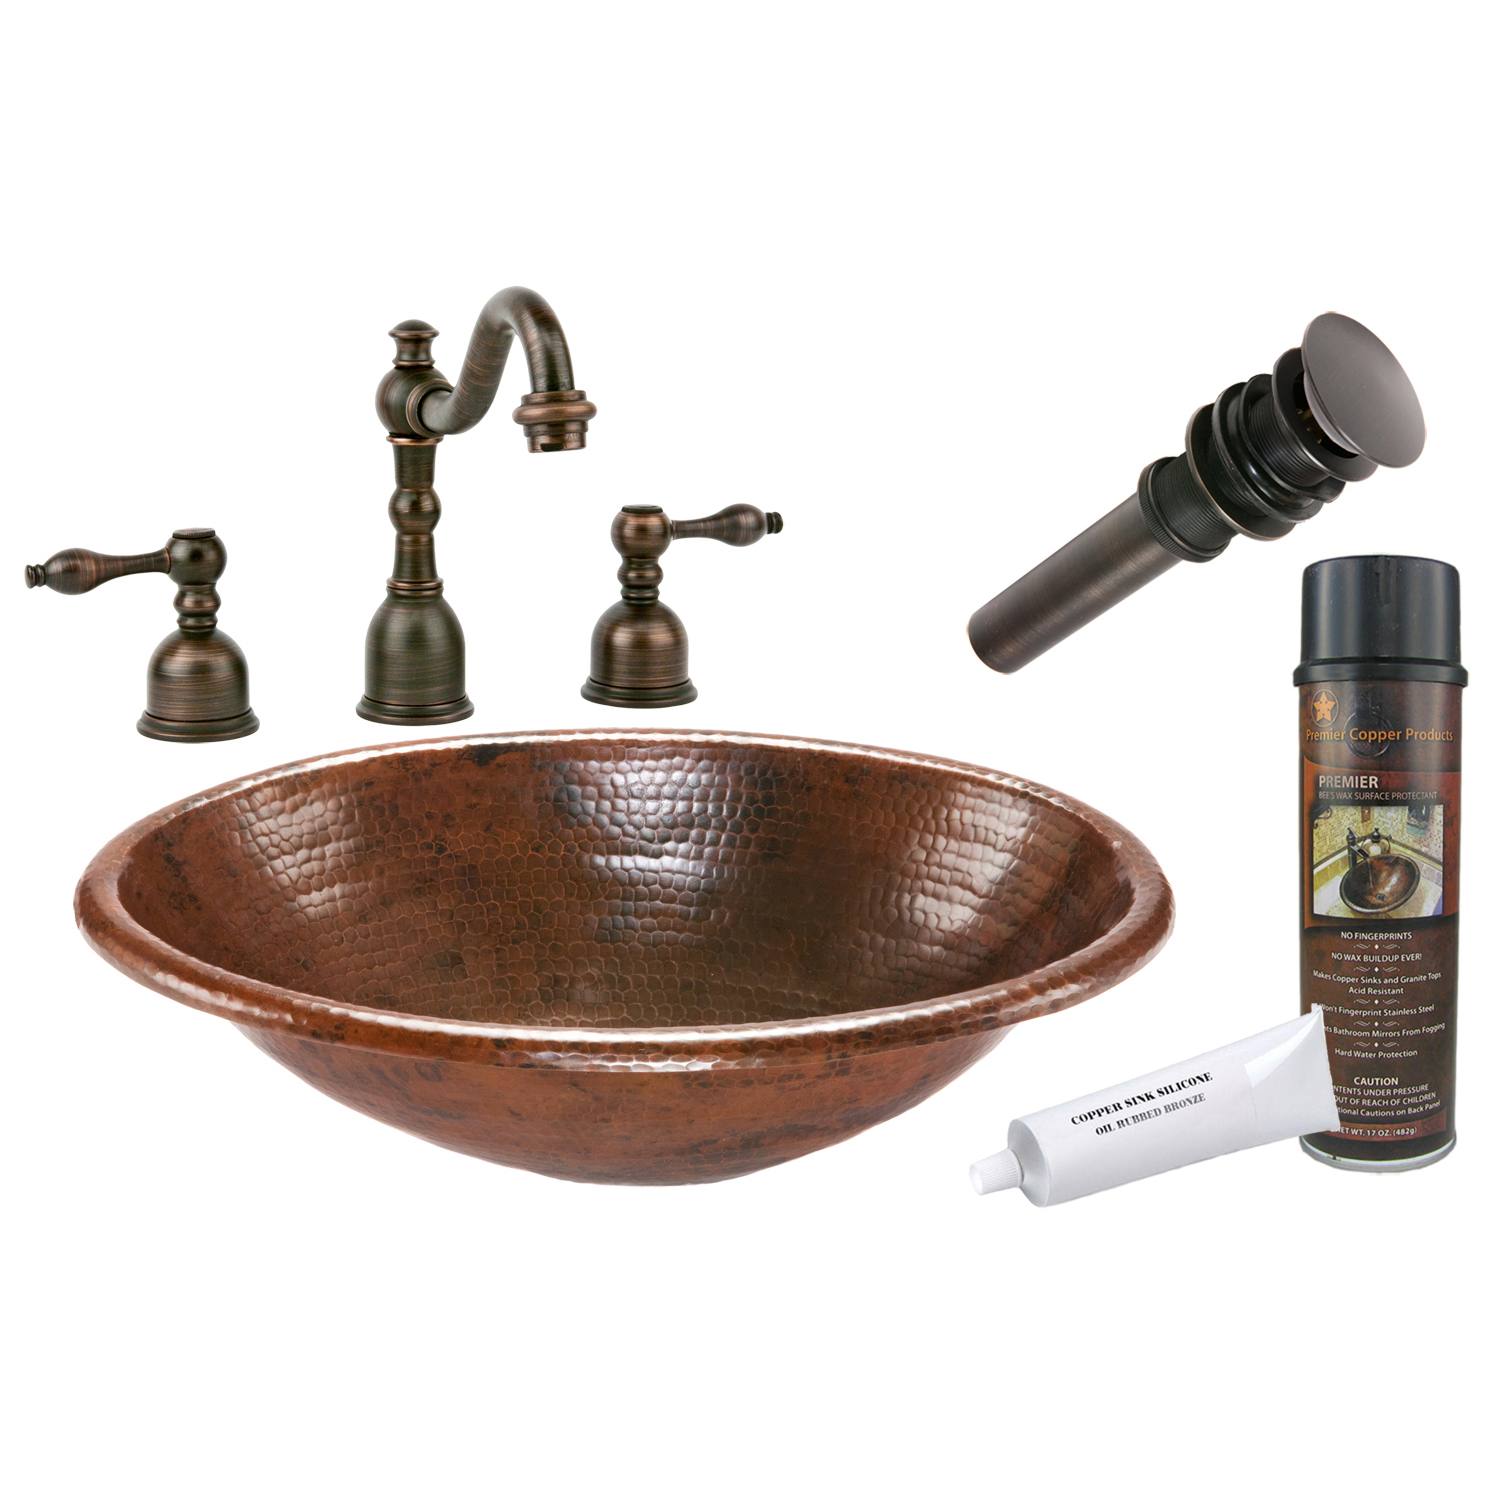 Oval Self Rimming Hammered Copper Sink, Faucet And Accessories Package, Oil Rubbed Bronze